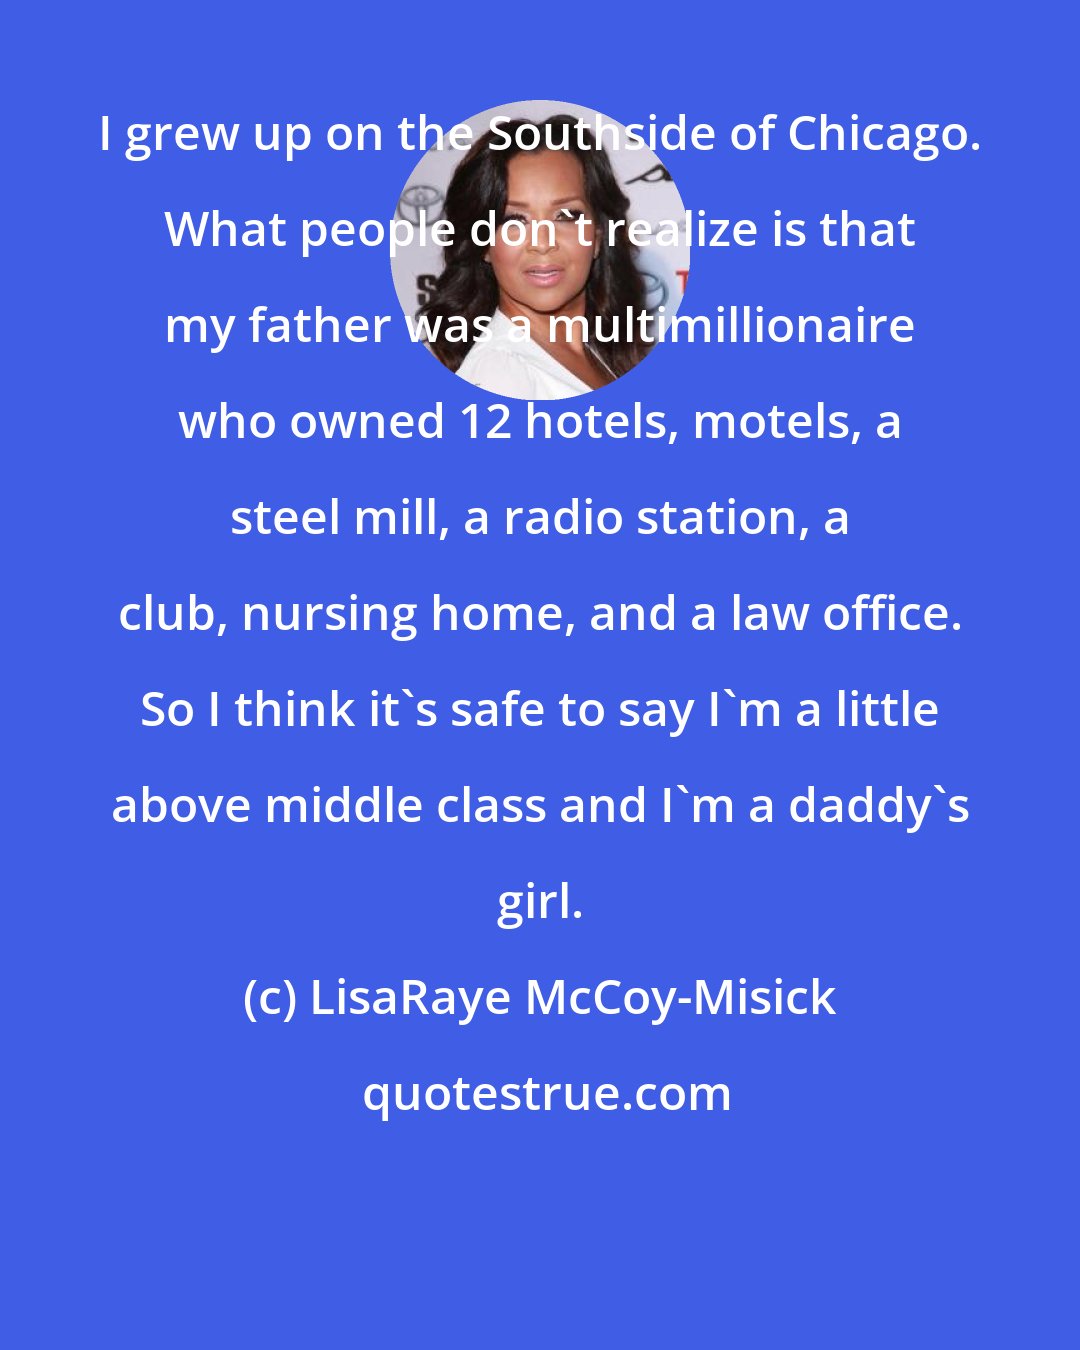 LisaRaye McCoy-Misick: I grew up on the Southside of Chicago. What people don't realize is that my father was a multimillionaire who owned 12 hotels, motels, a steel mill, a radio station, a club, nursing home, and a law office. So I think it's safe to say I'm a little above middle class and I'm a daddy's girl.